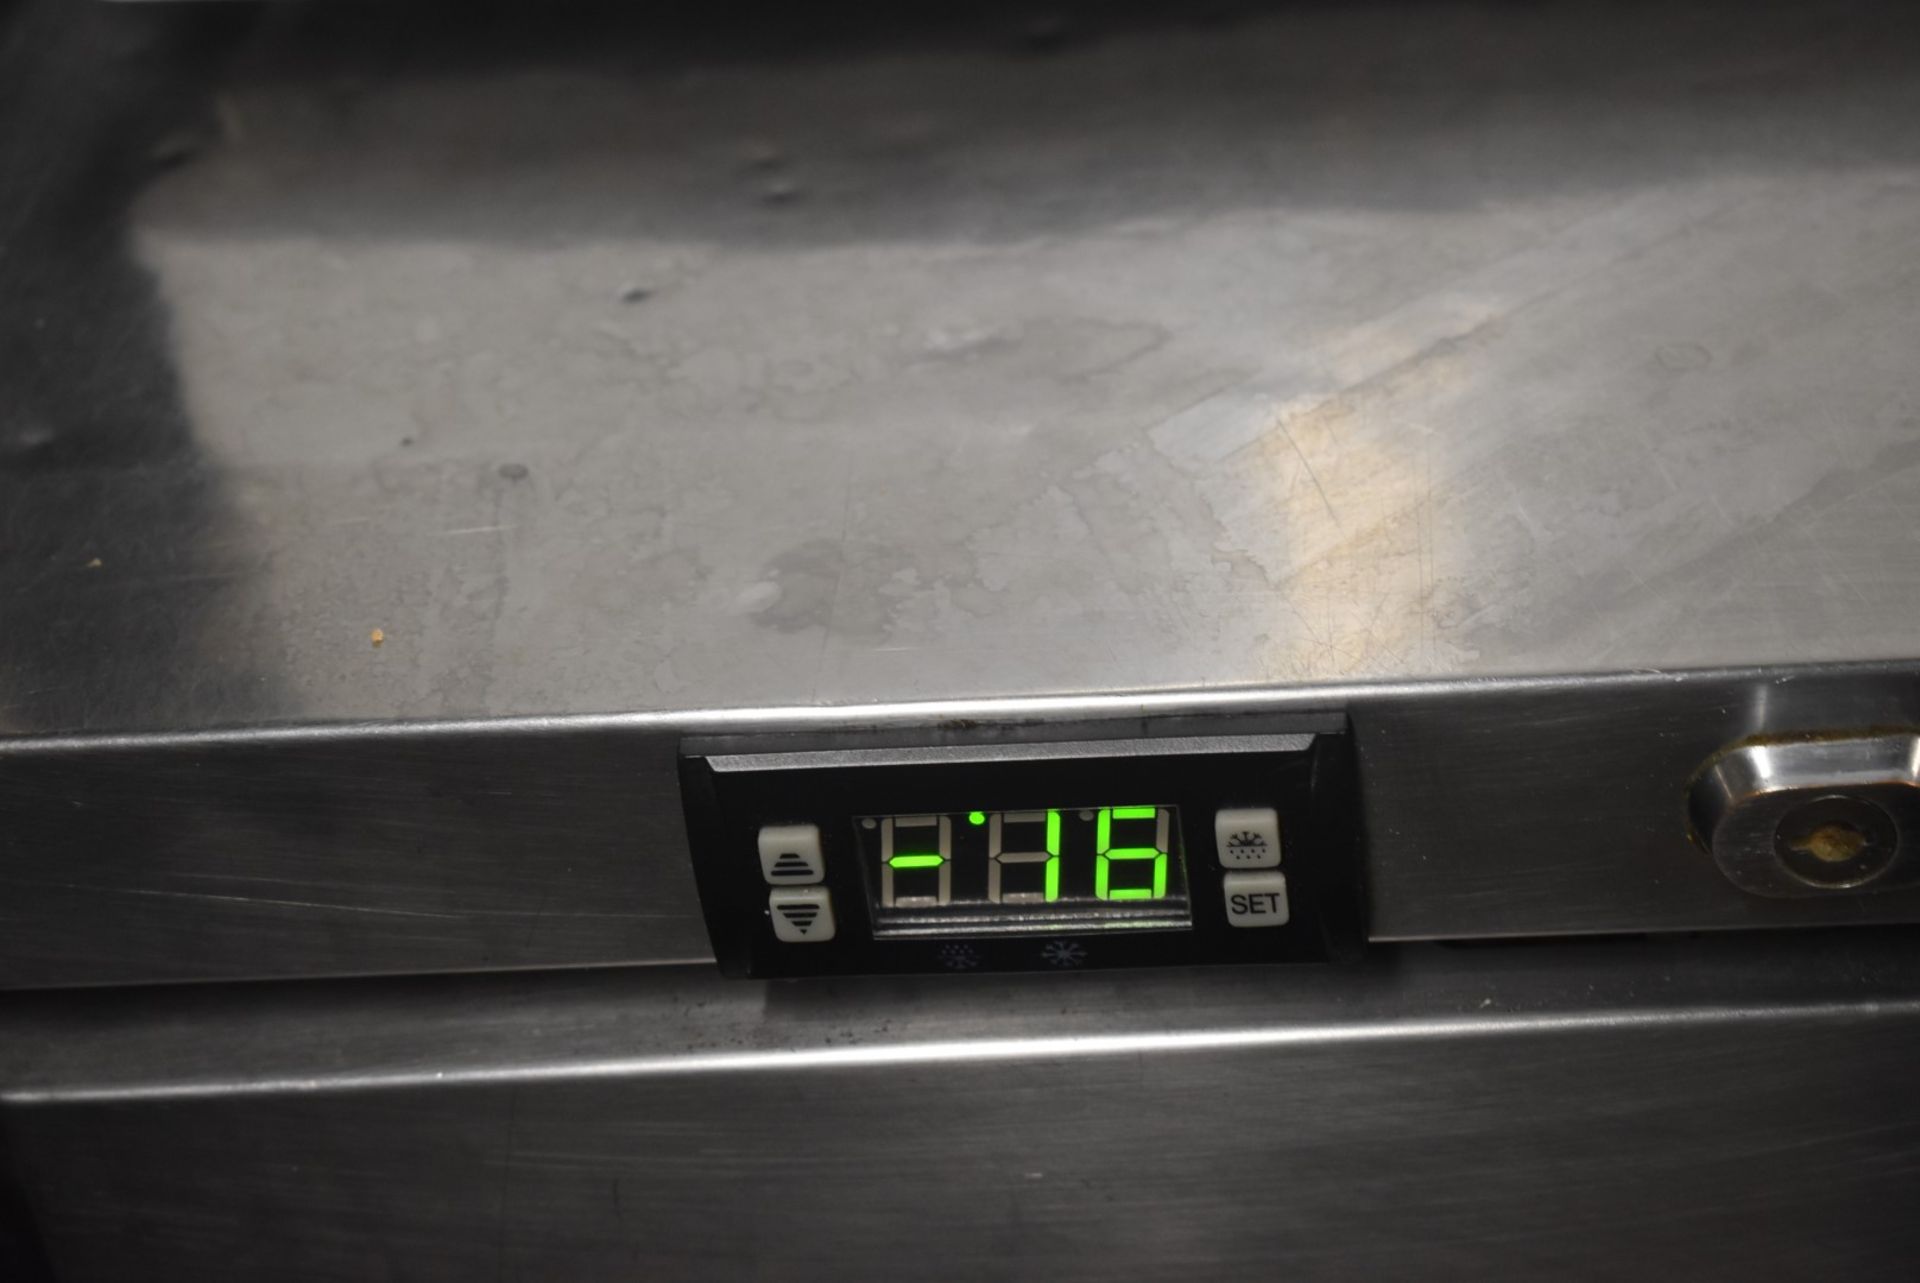 1 x Blizzard 60cm Undercounter Freezer With Stainless Steel Finish - Image 3 of 3